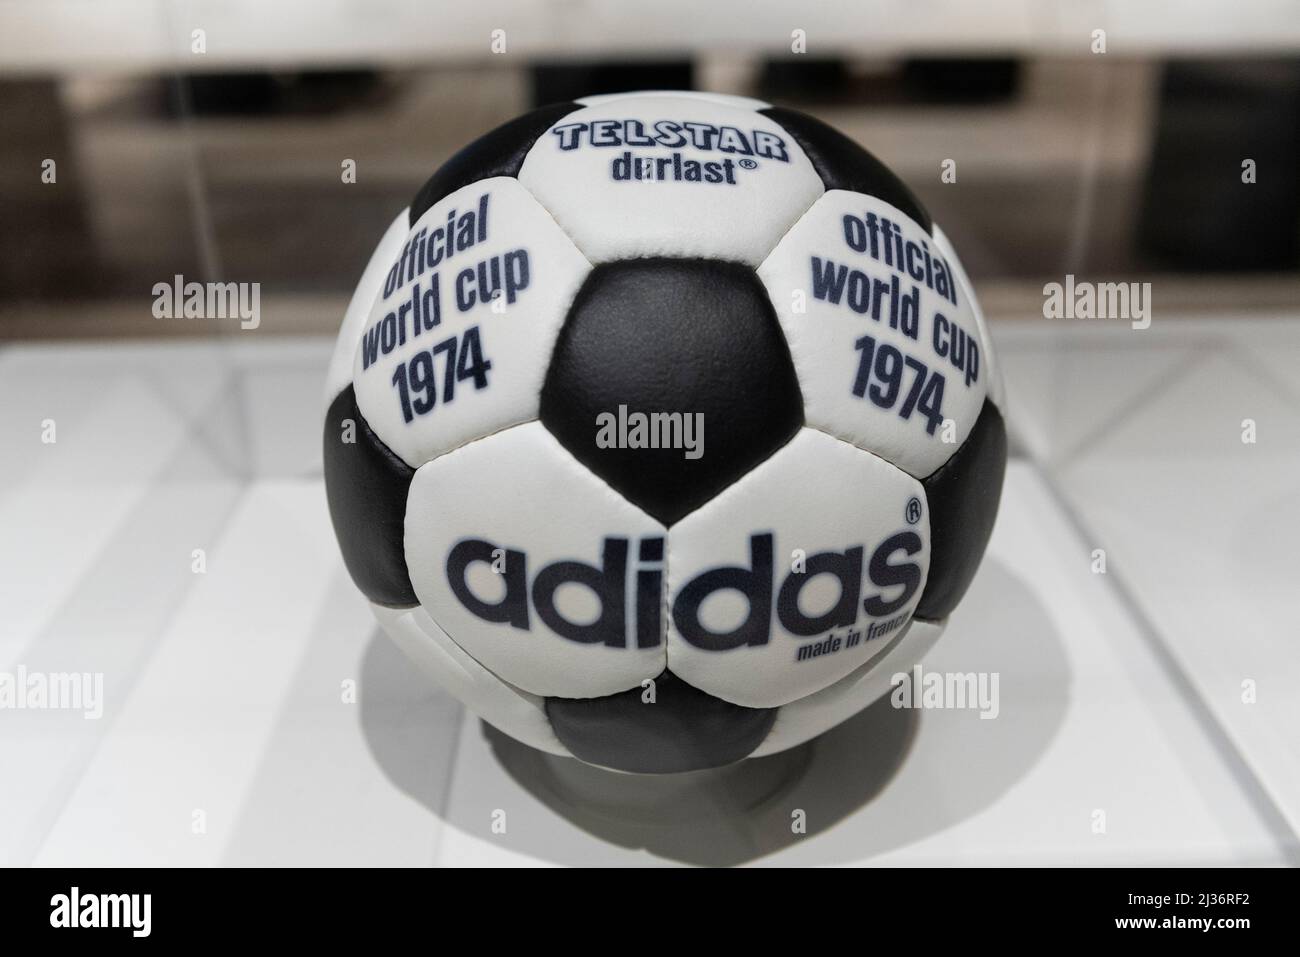 Adidas telstar hi-res stock photography and images - Alamy